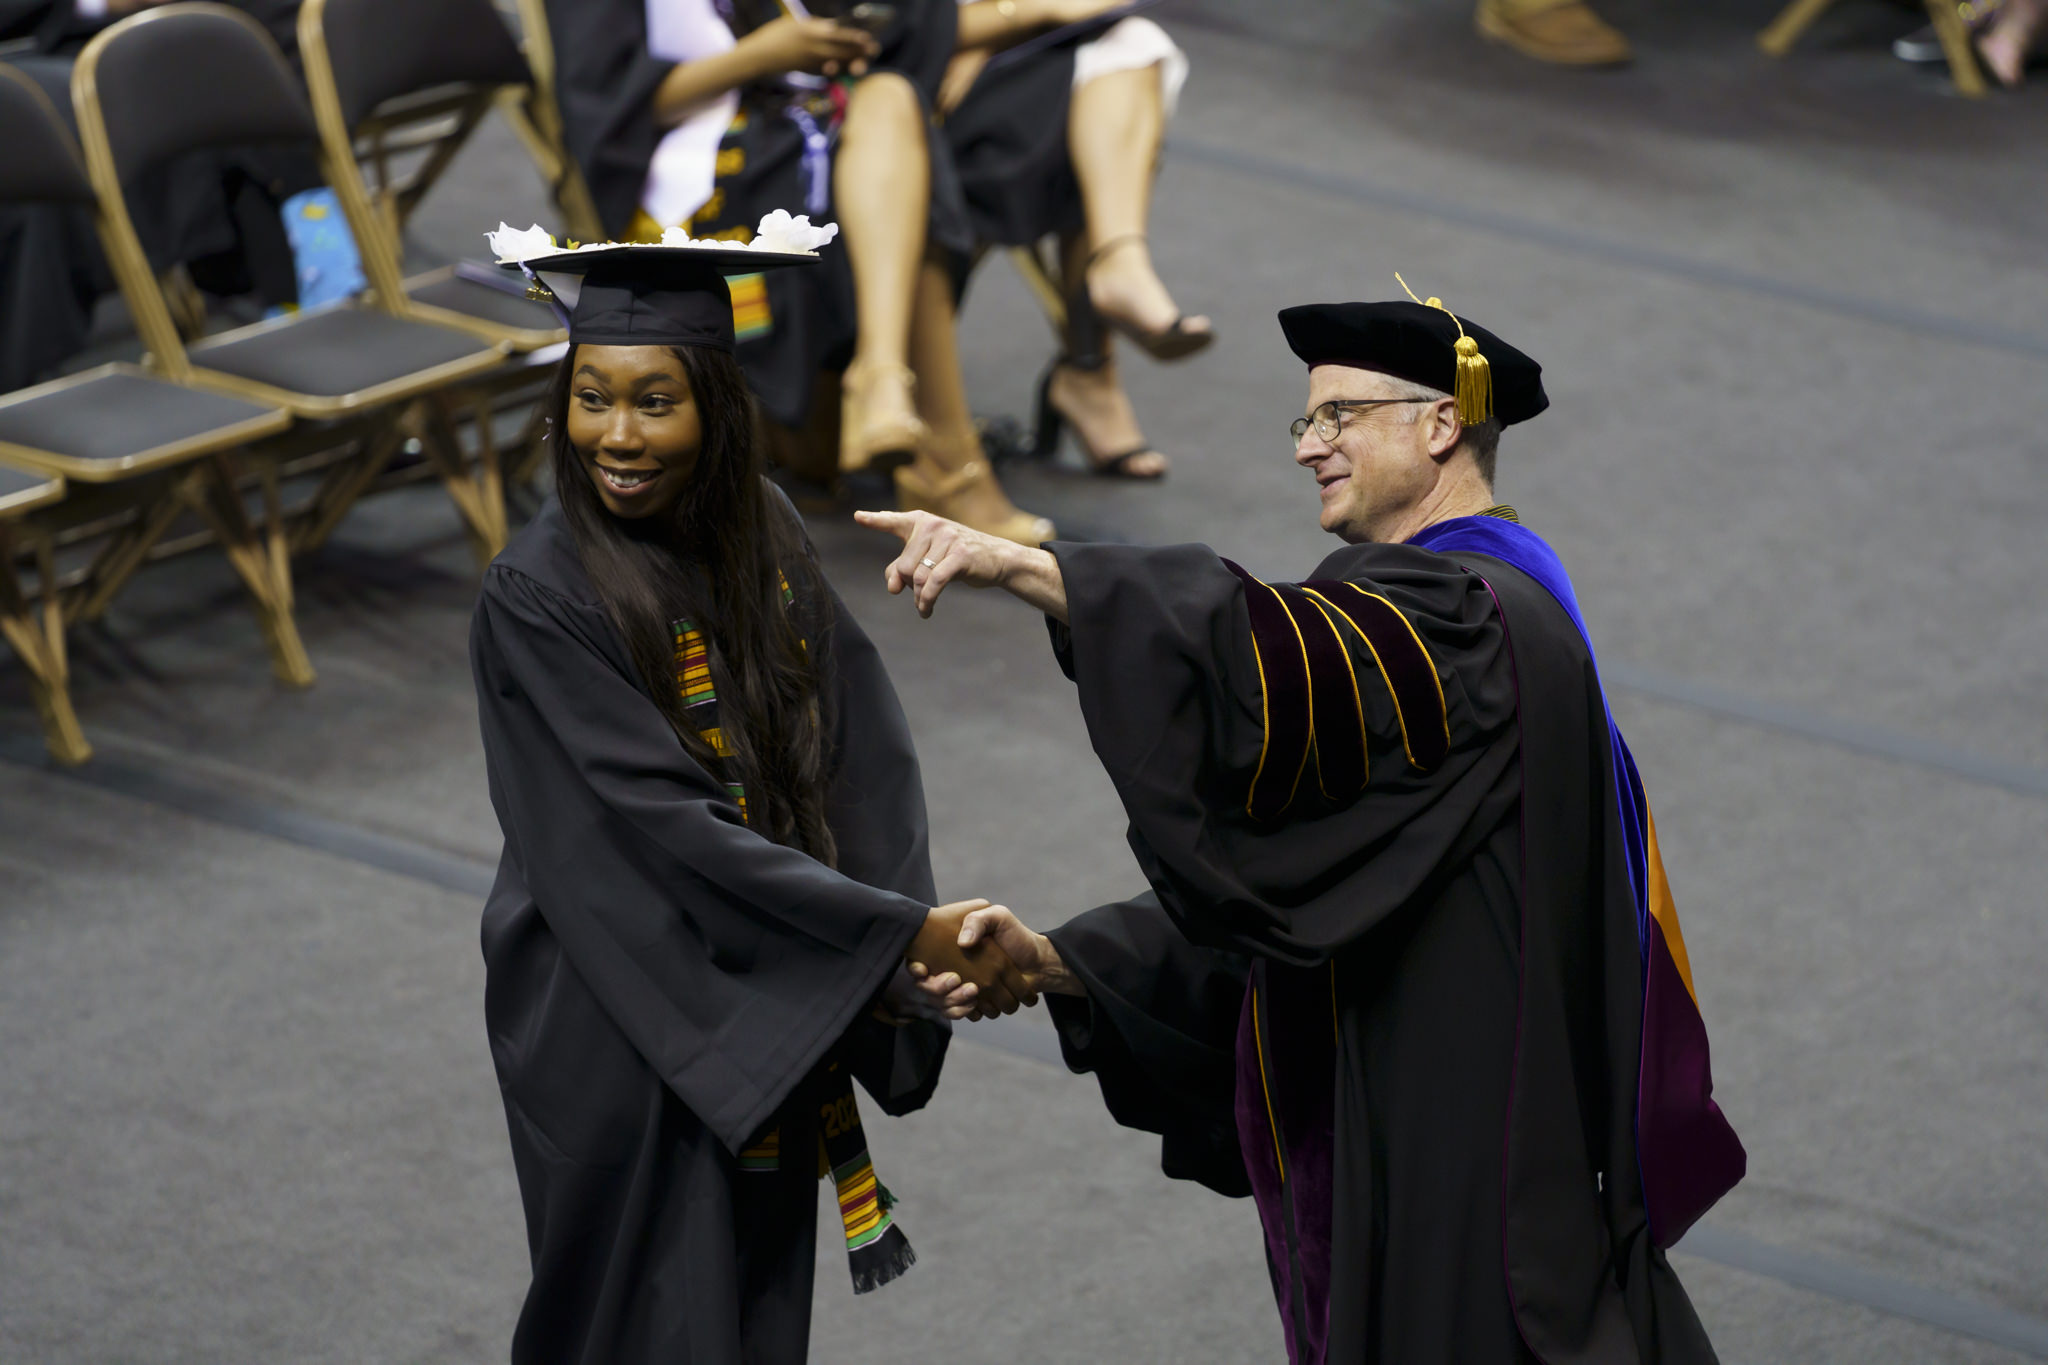 Dean Cooper Drury shaking the hand of an A&S undergraduate at commencement and pointing out someone in the crowd to her